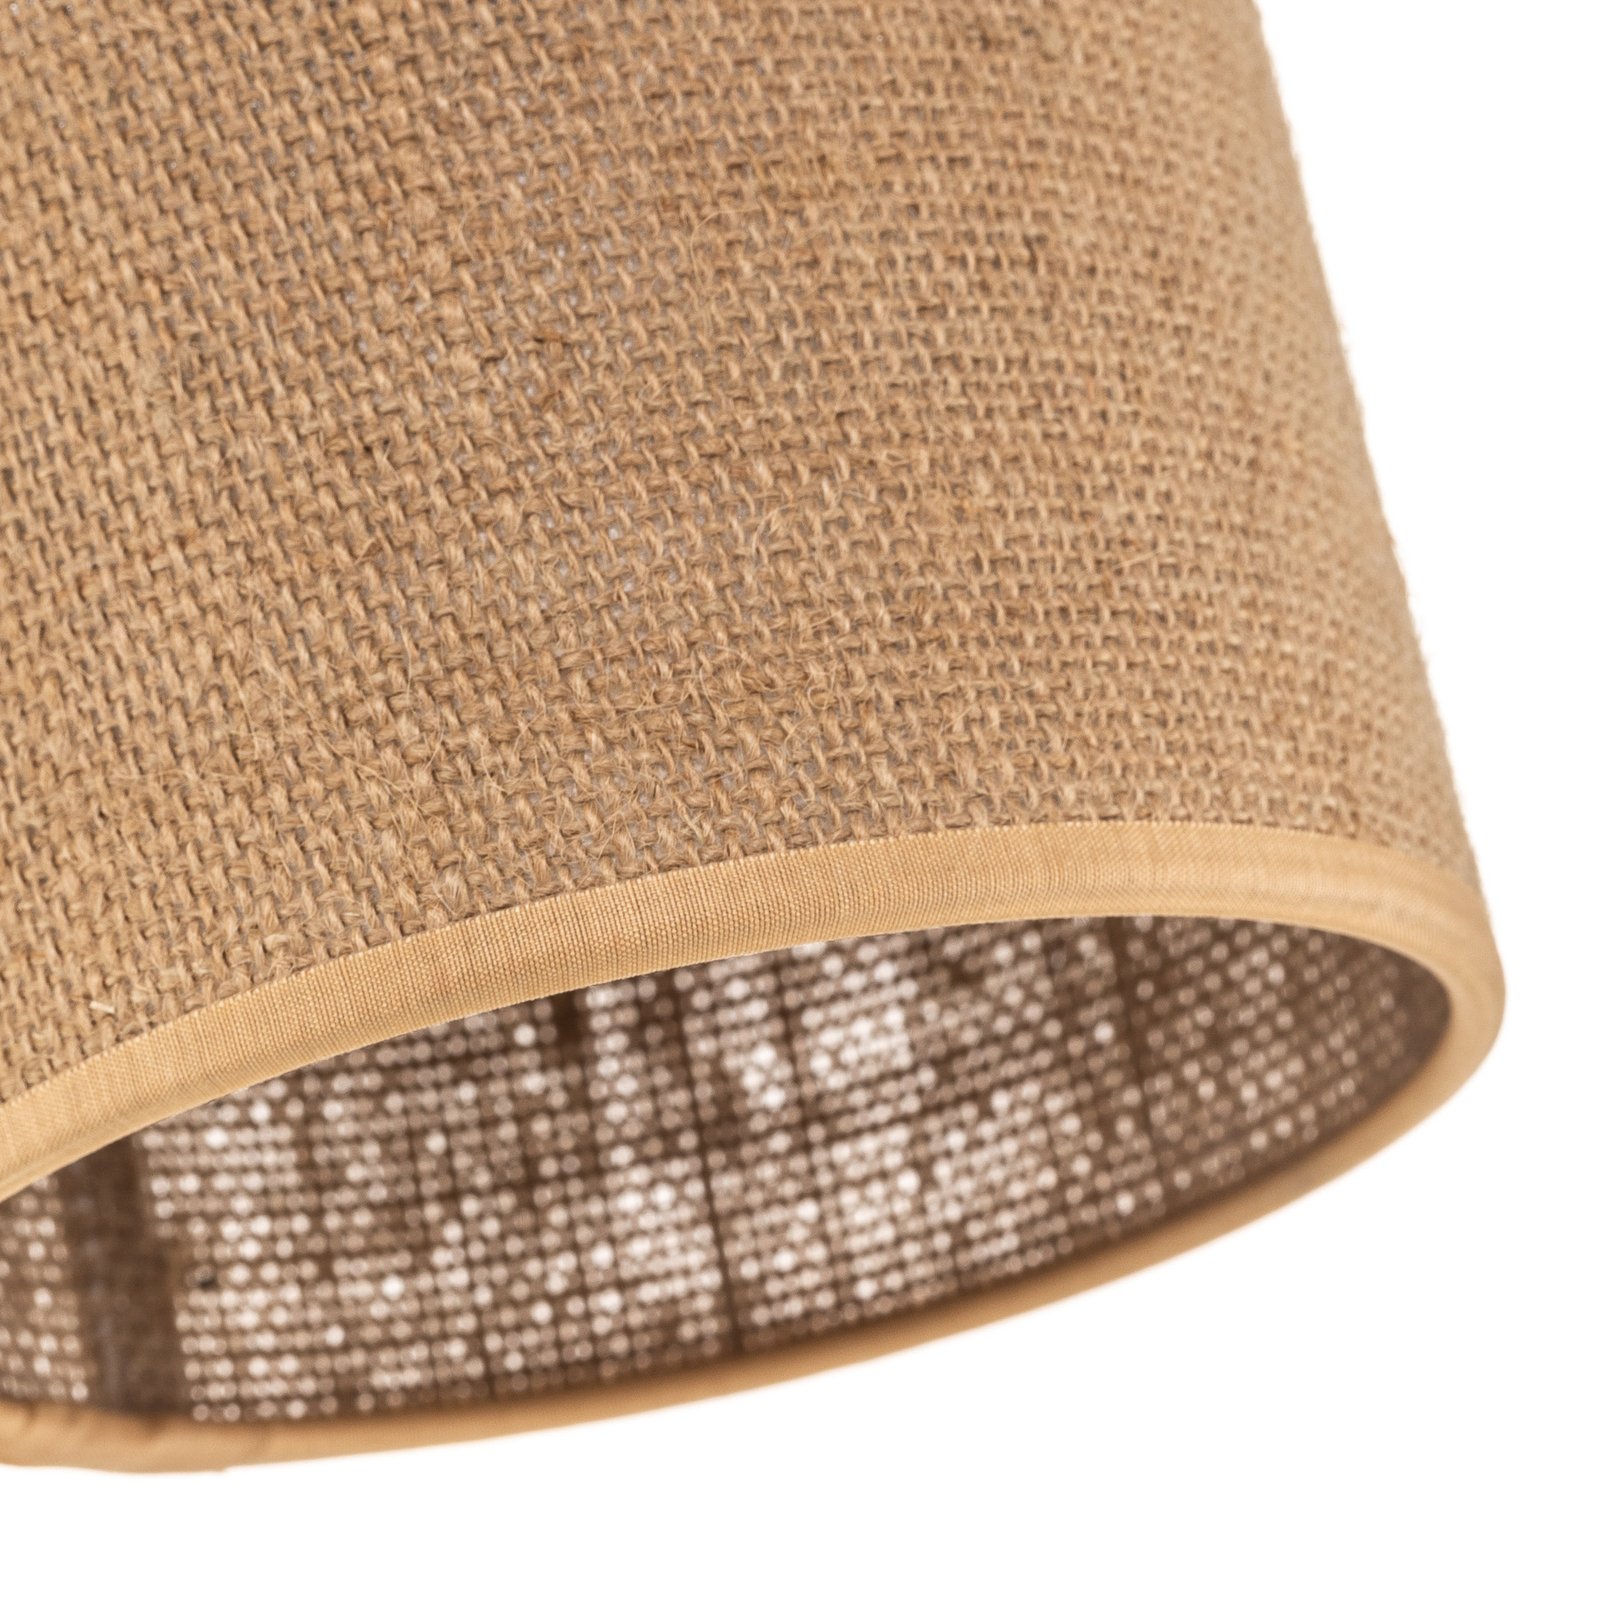 Jute ceiling light with textile shades, 2-bulb